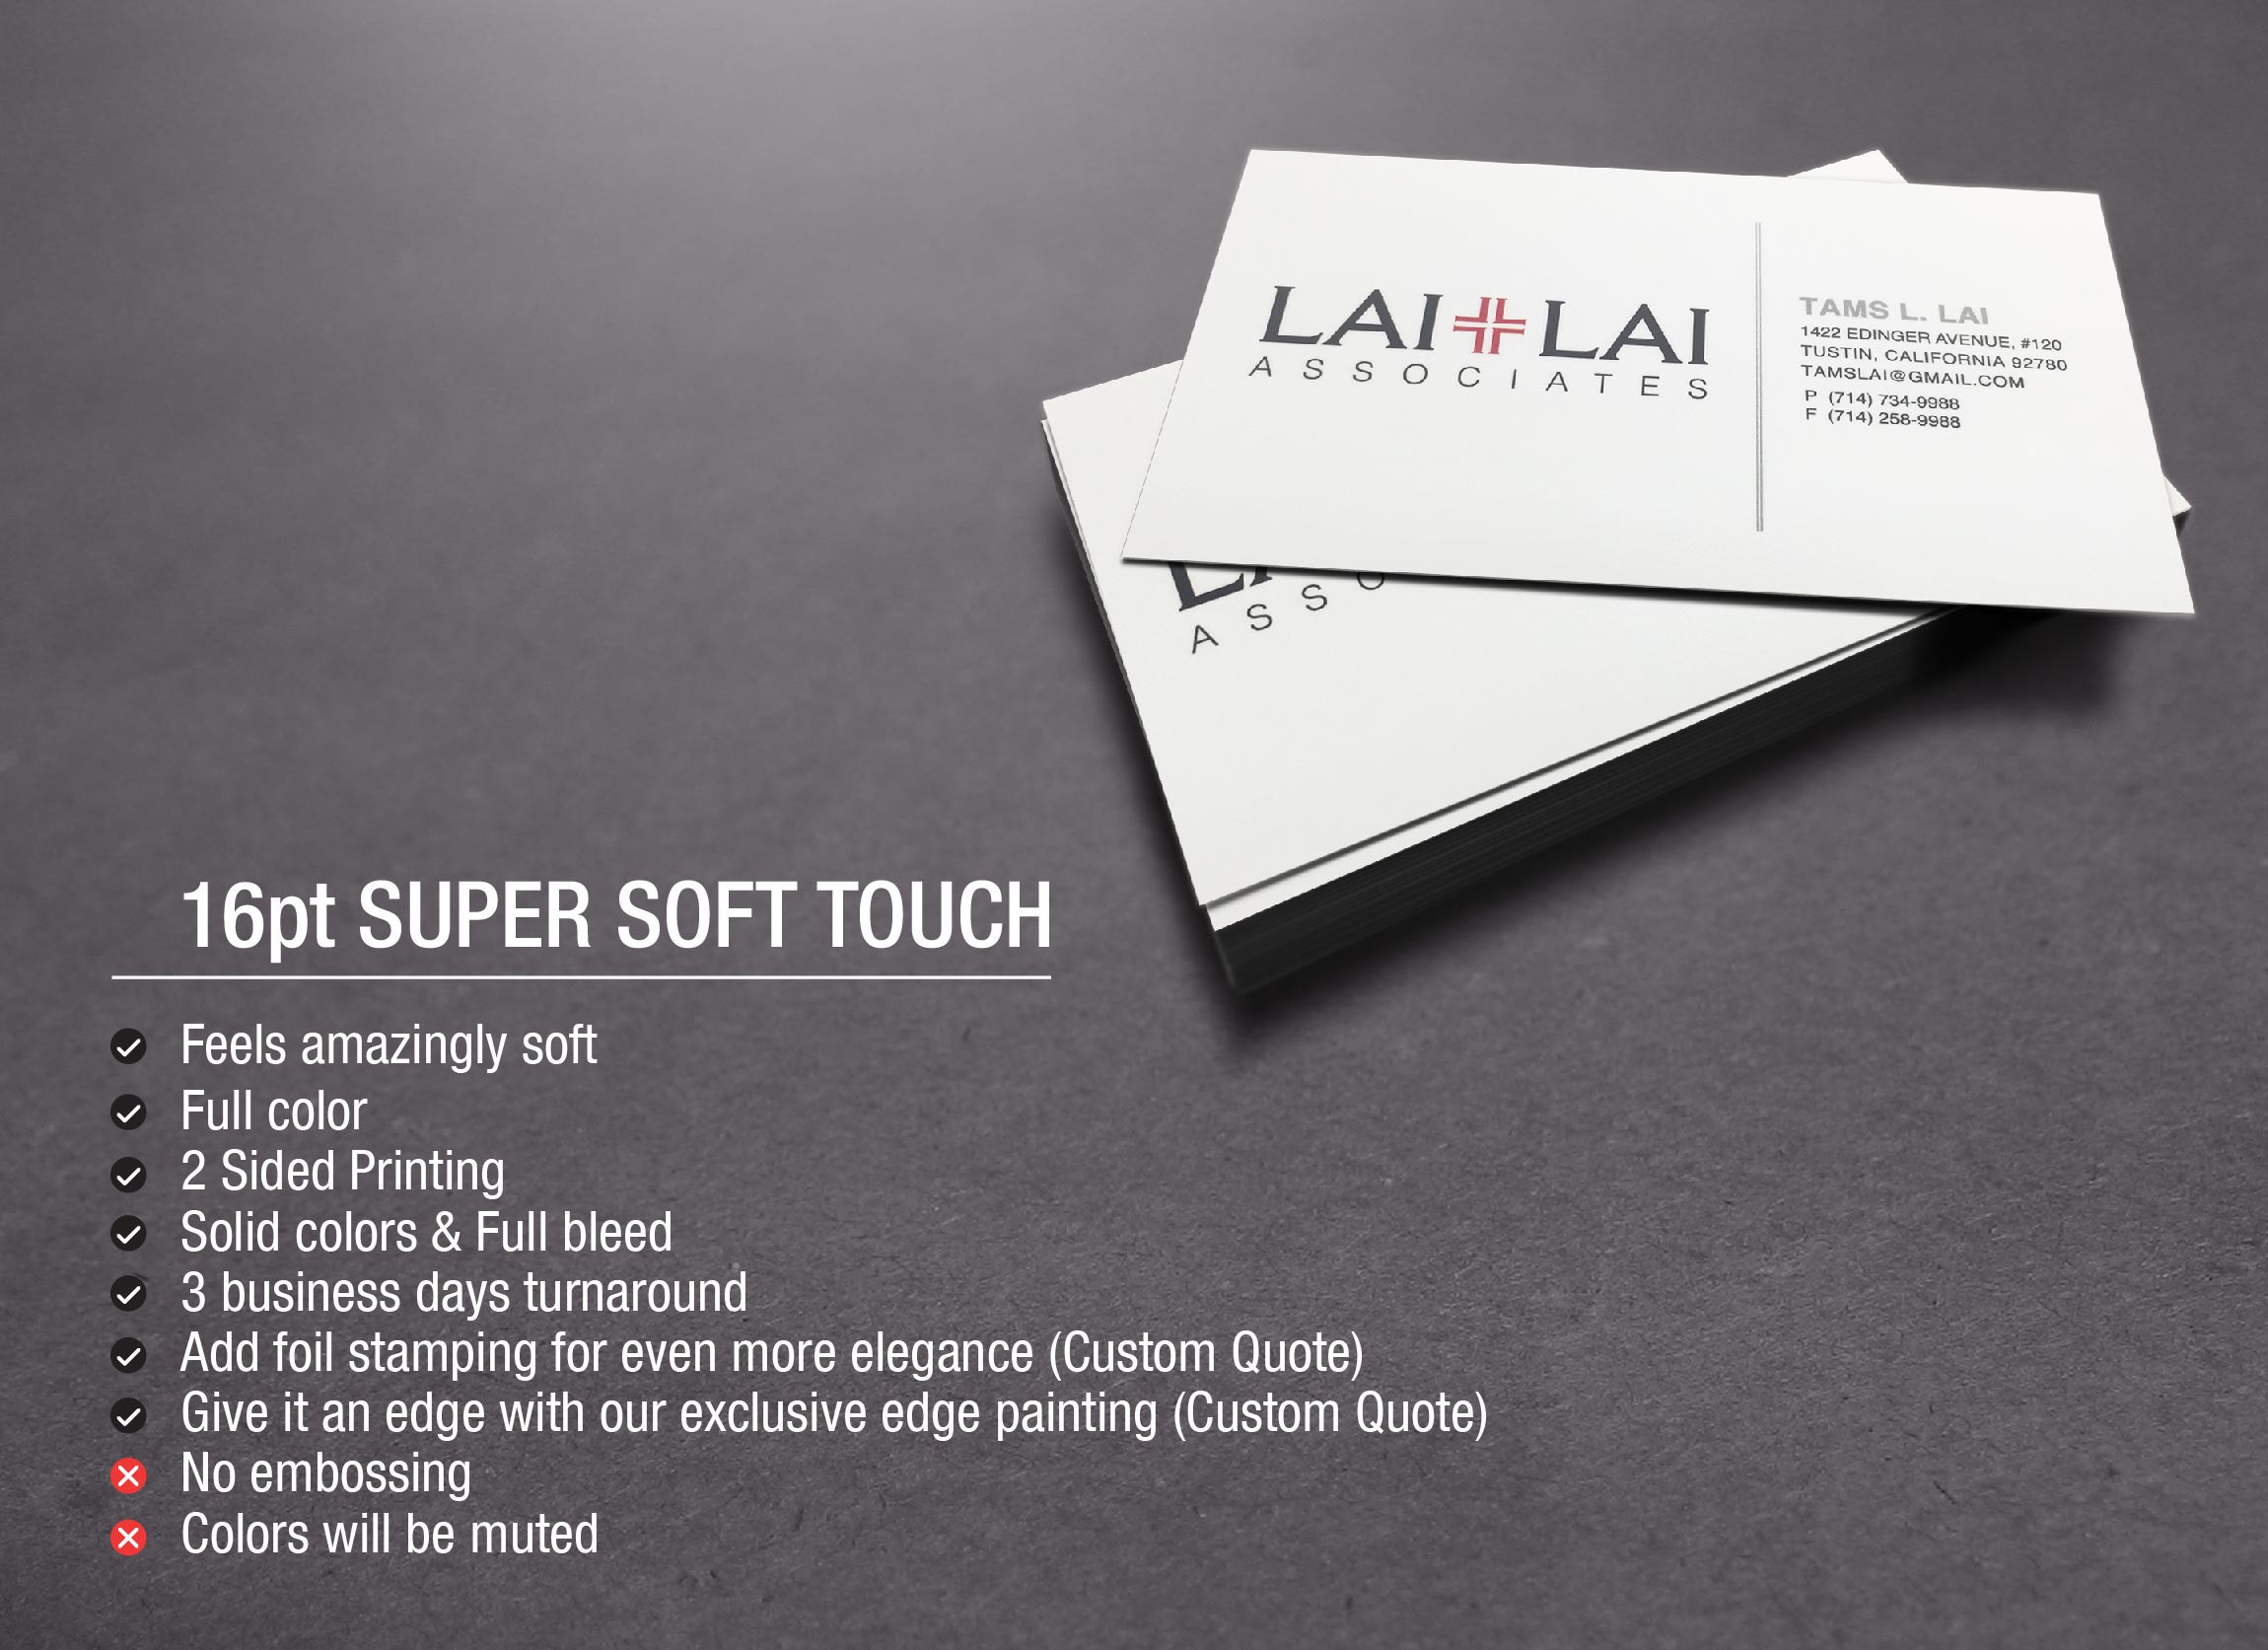 Plastic Business Cards Near Me and Signs Design Sample Kit Of Plastic Business Card Template